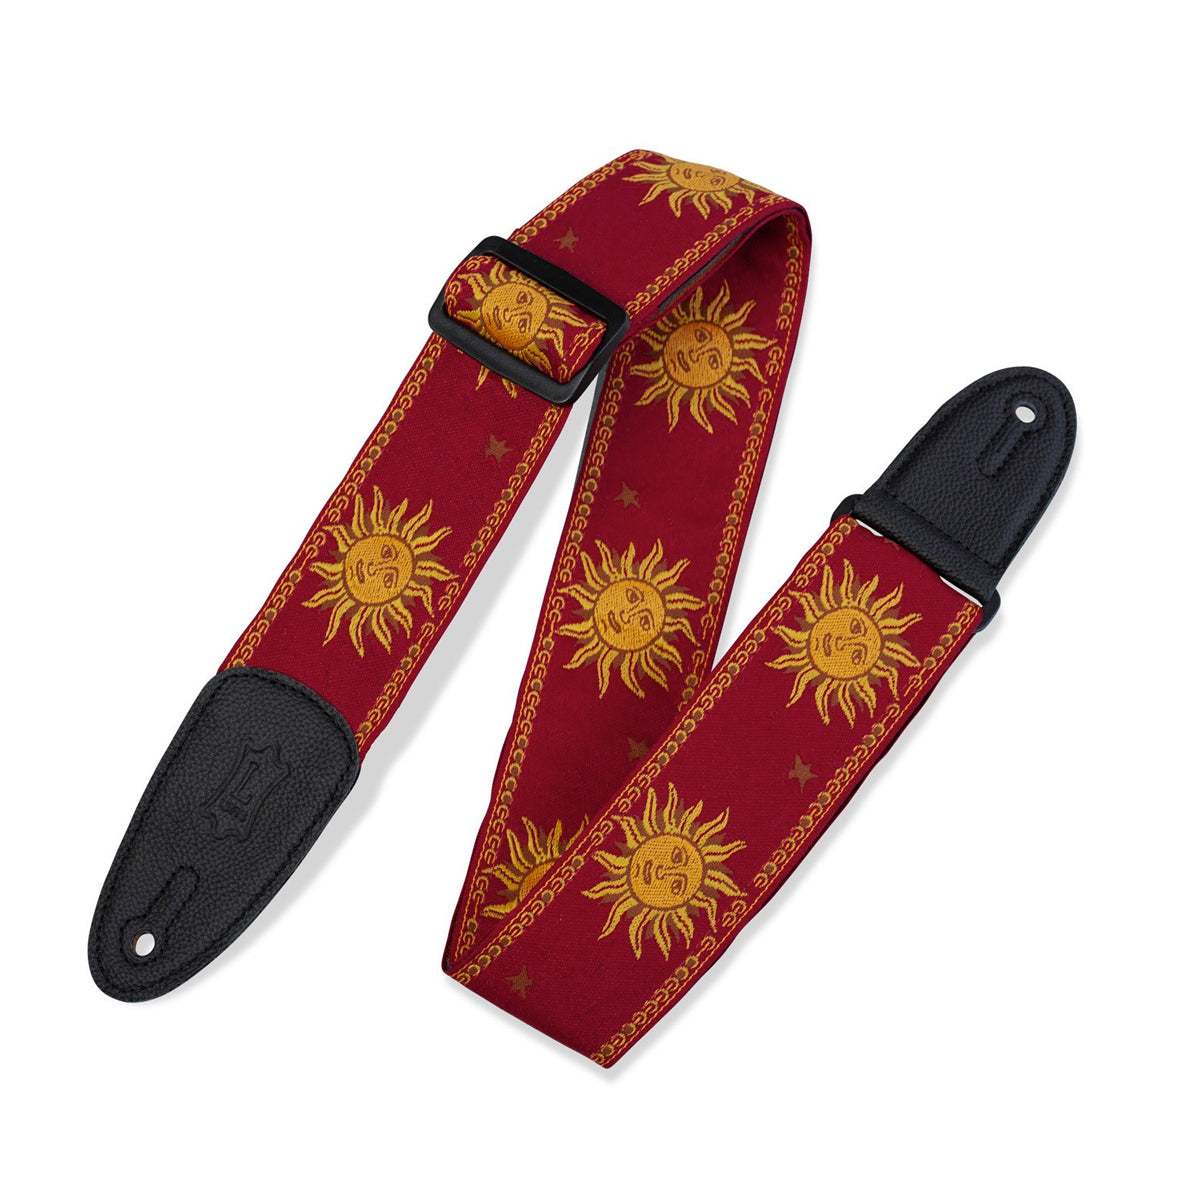 2“ Wide Red Jacquard Guitar Strap.